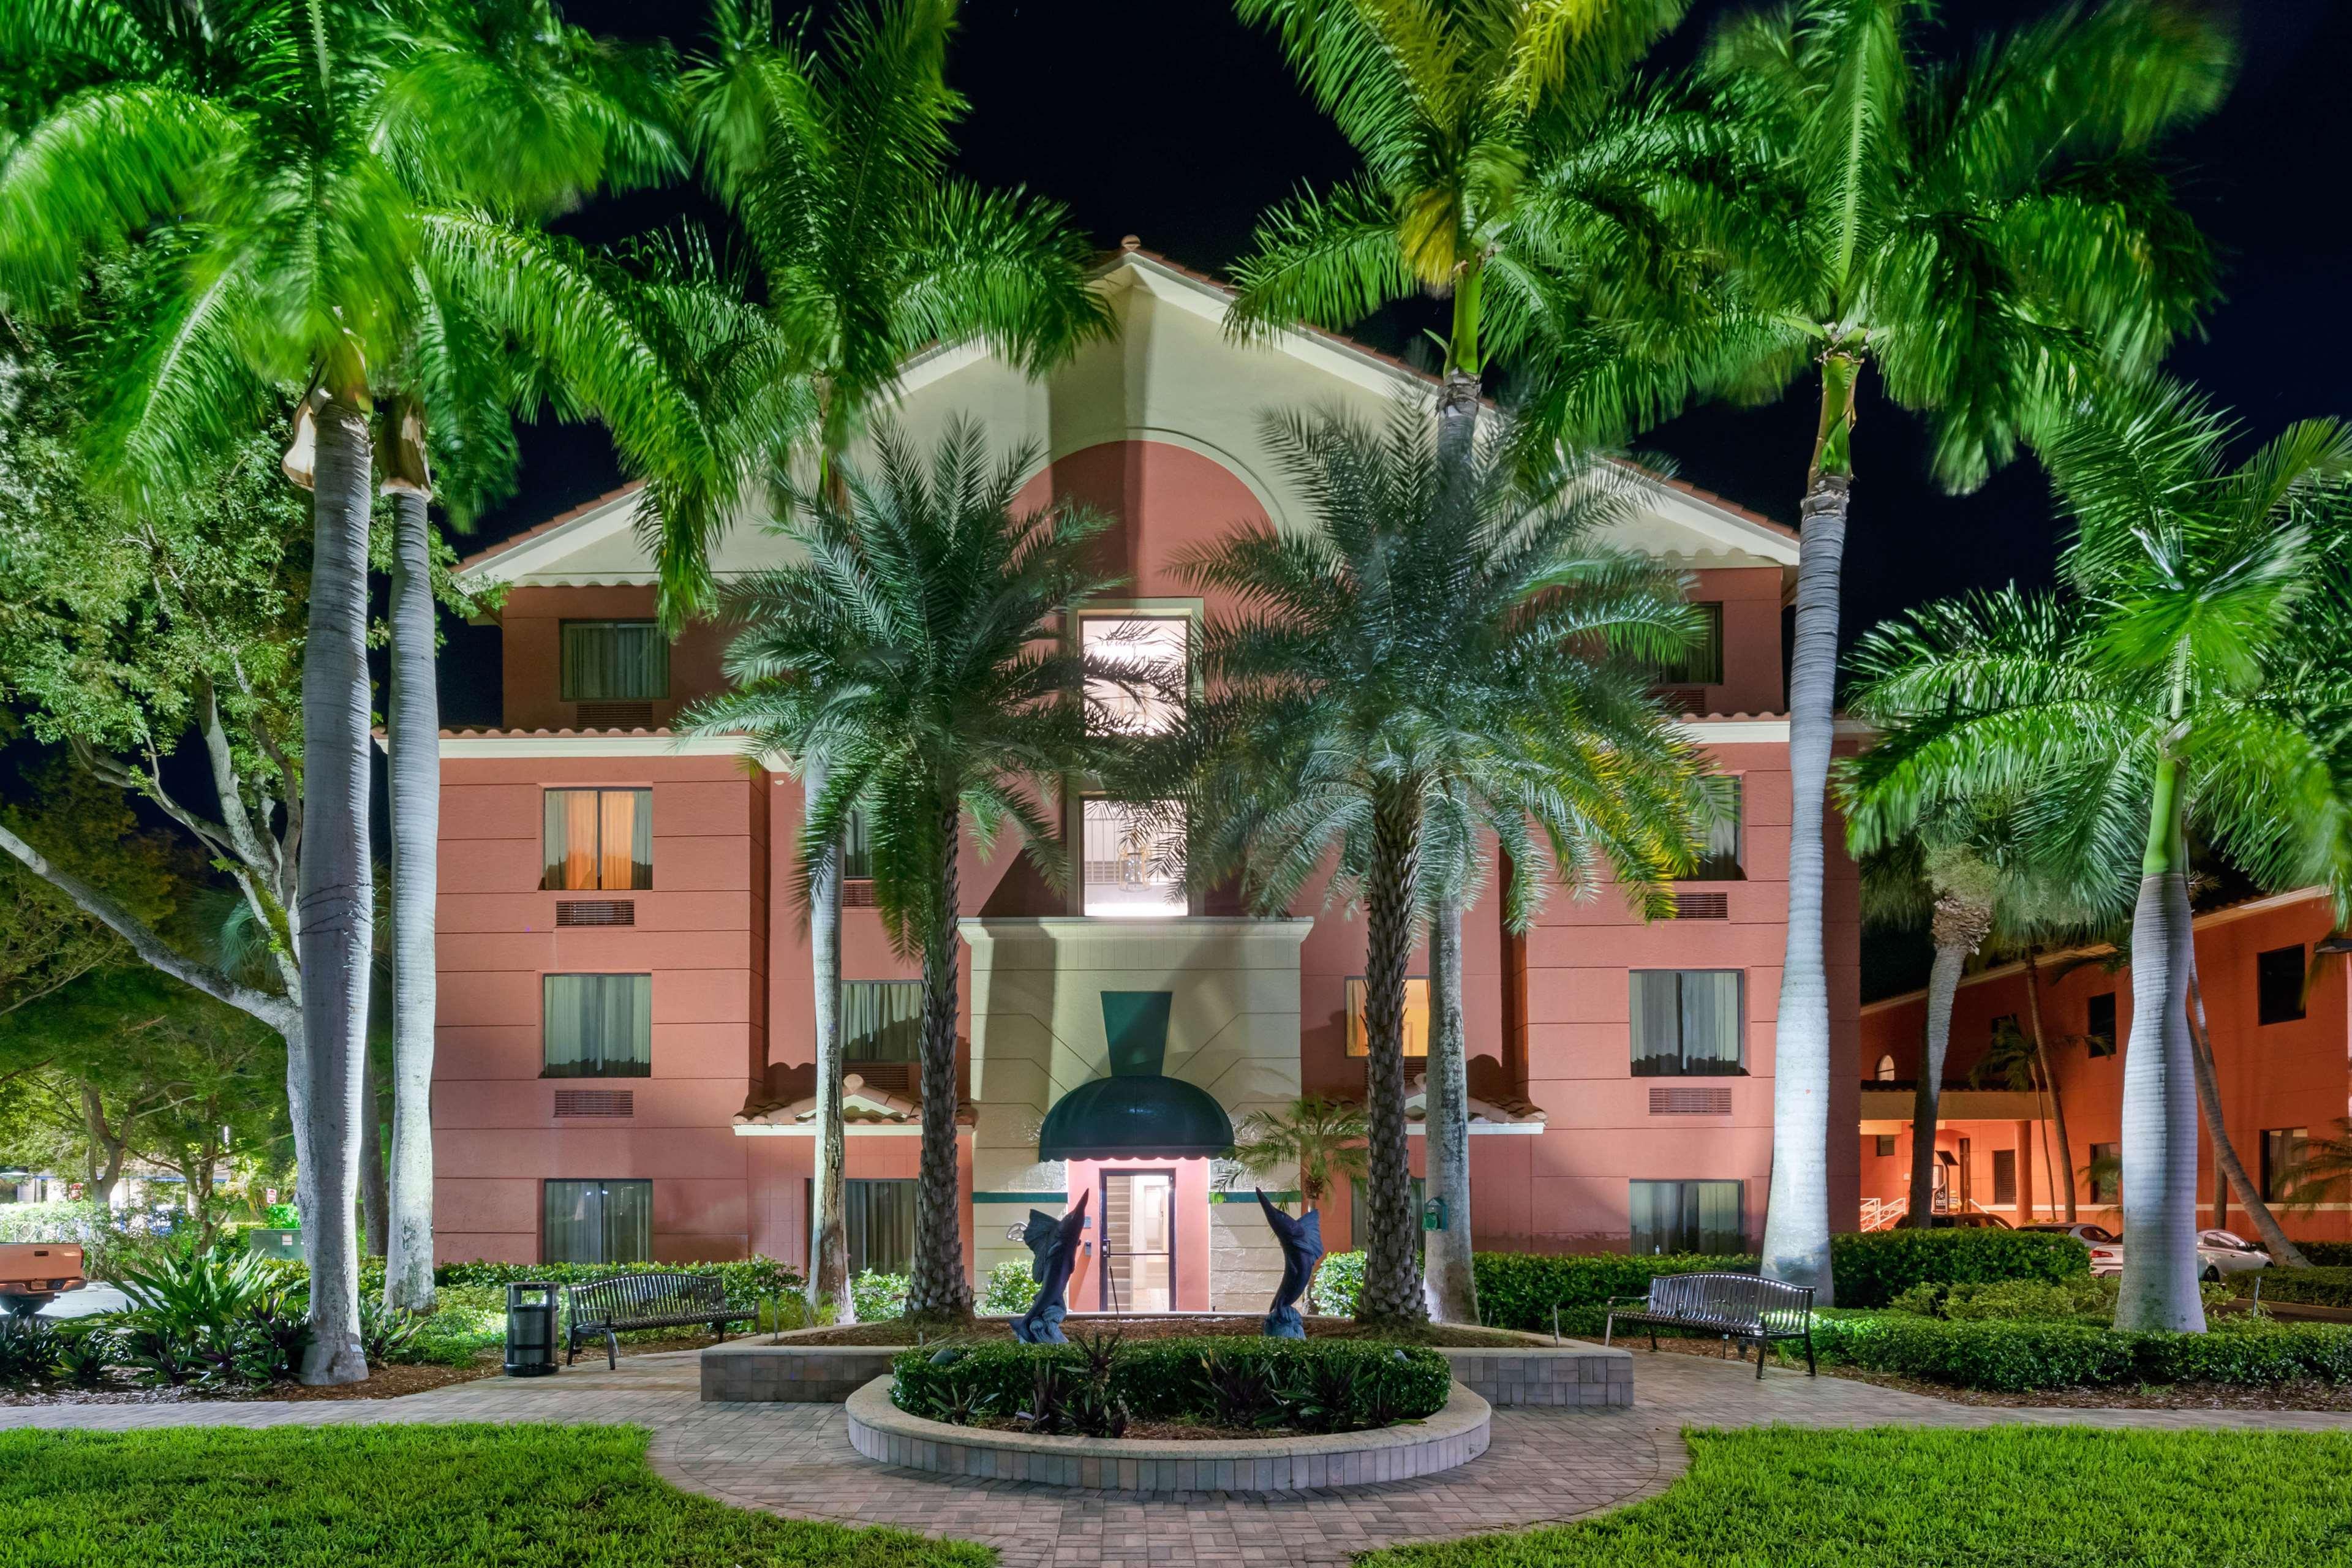 Best Western Plus Palm Beach Gardens Hotel & Suites And Conference Ct Экстерьер фото